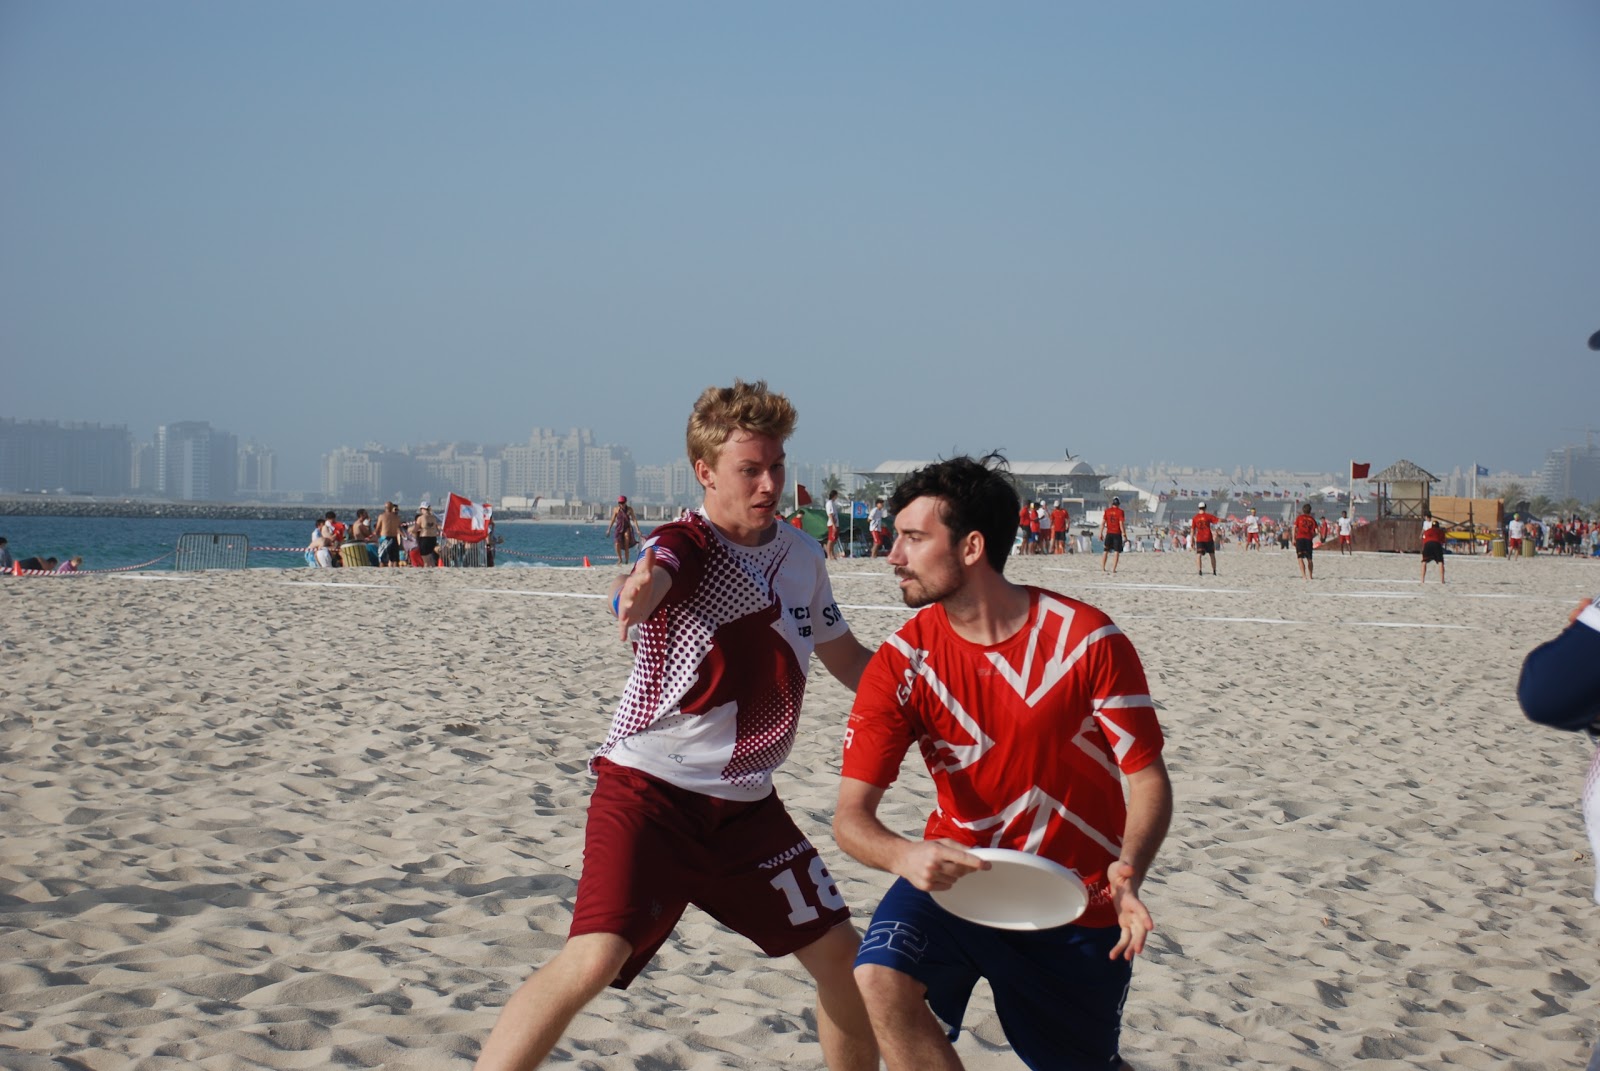 Opening the Sky World Championships for Beach Ultimate Frisbee